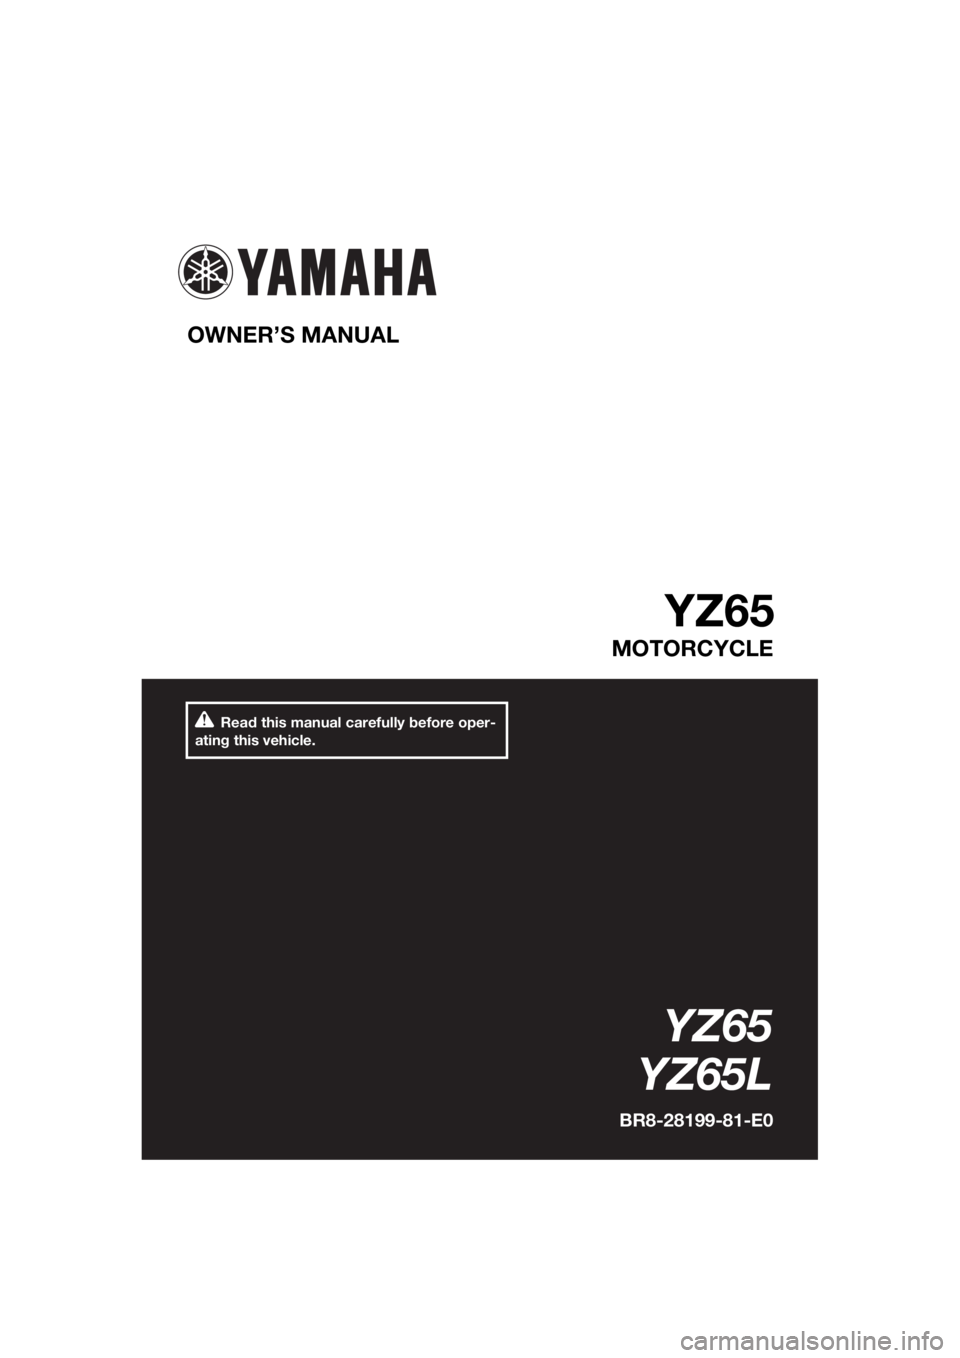 YAMAHA YZ65 2020  Owners Manual Read this manual carefully before oper-
ating this vehicle.
OWNER’S MANUAL 
YZ65
MOTORCYCLE
YZ65
YZ65L
BR8-28199-81-E0
UBR881E0.book  Page 1  Tuesday, April 2, 2019  9:44 AM 